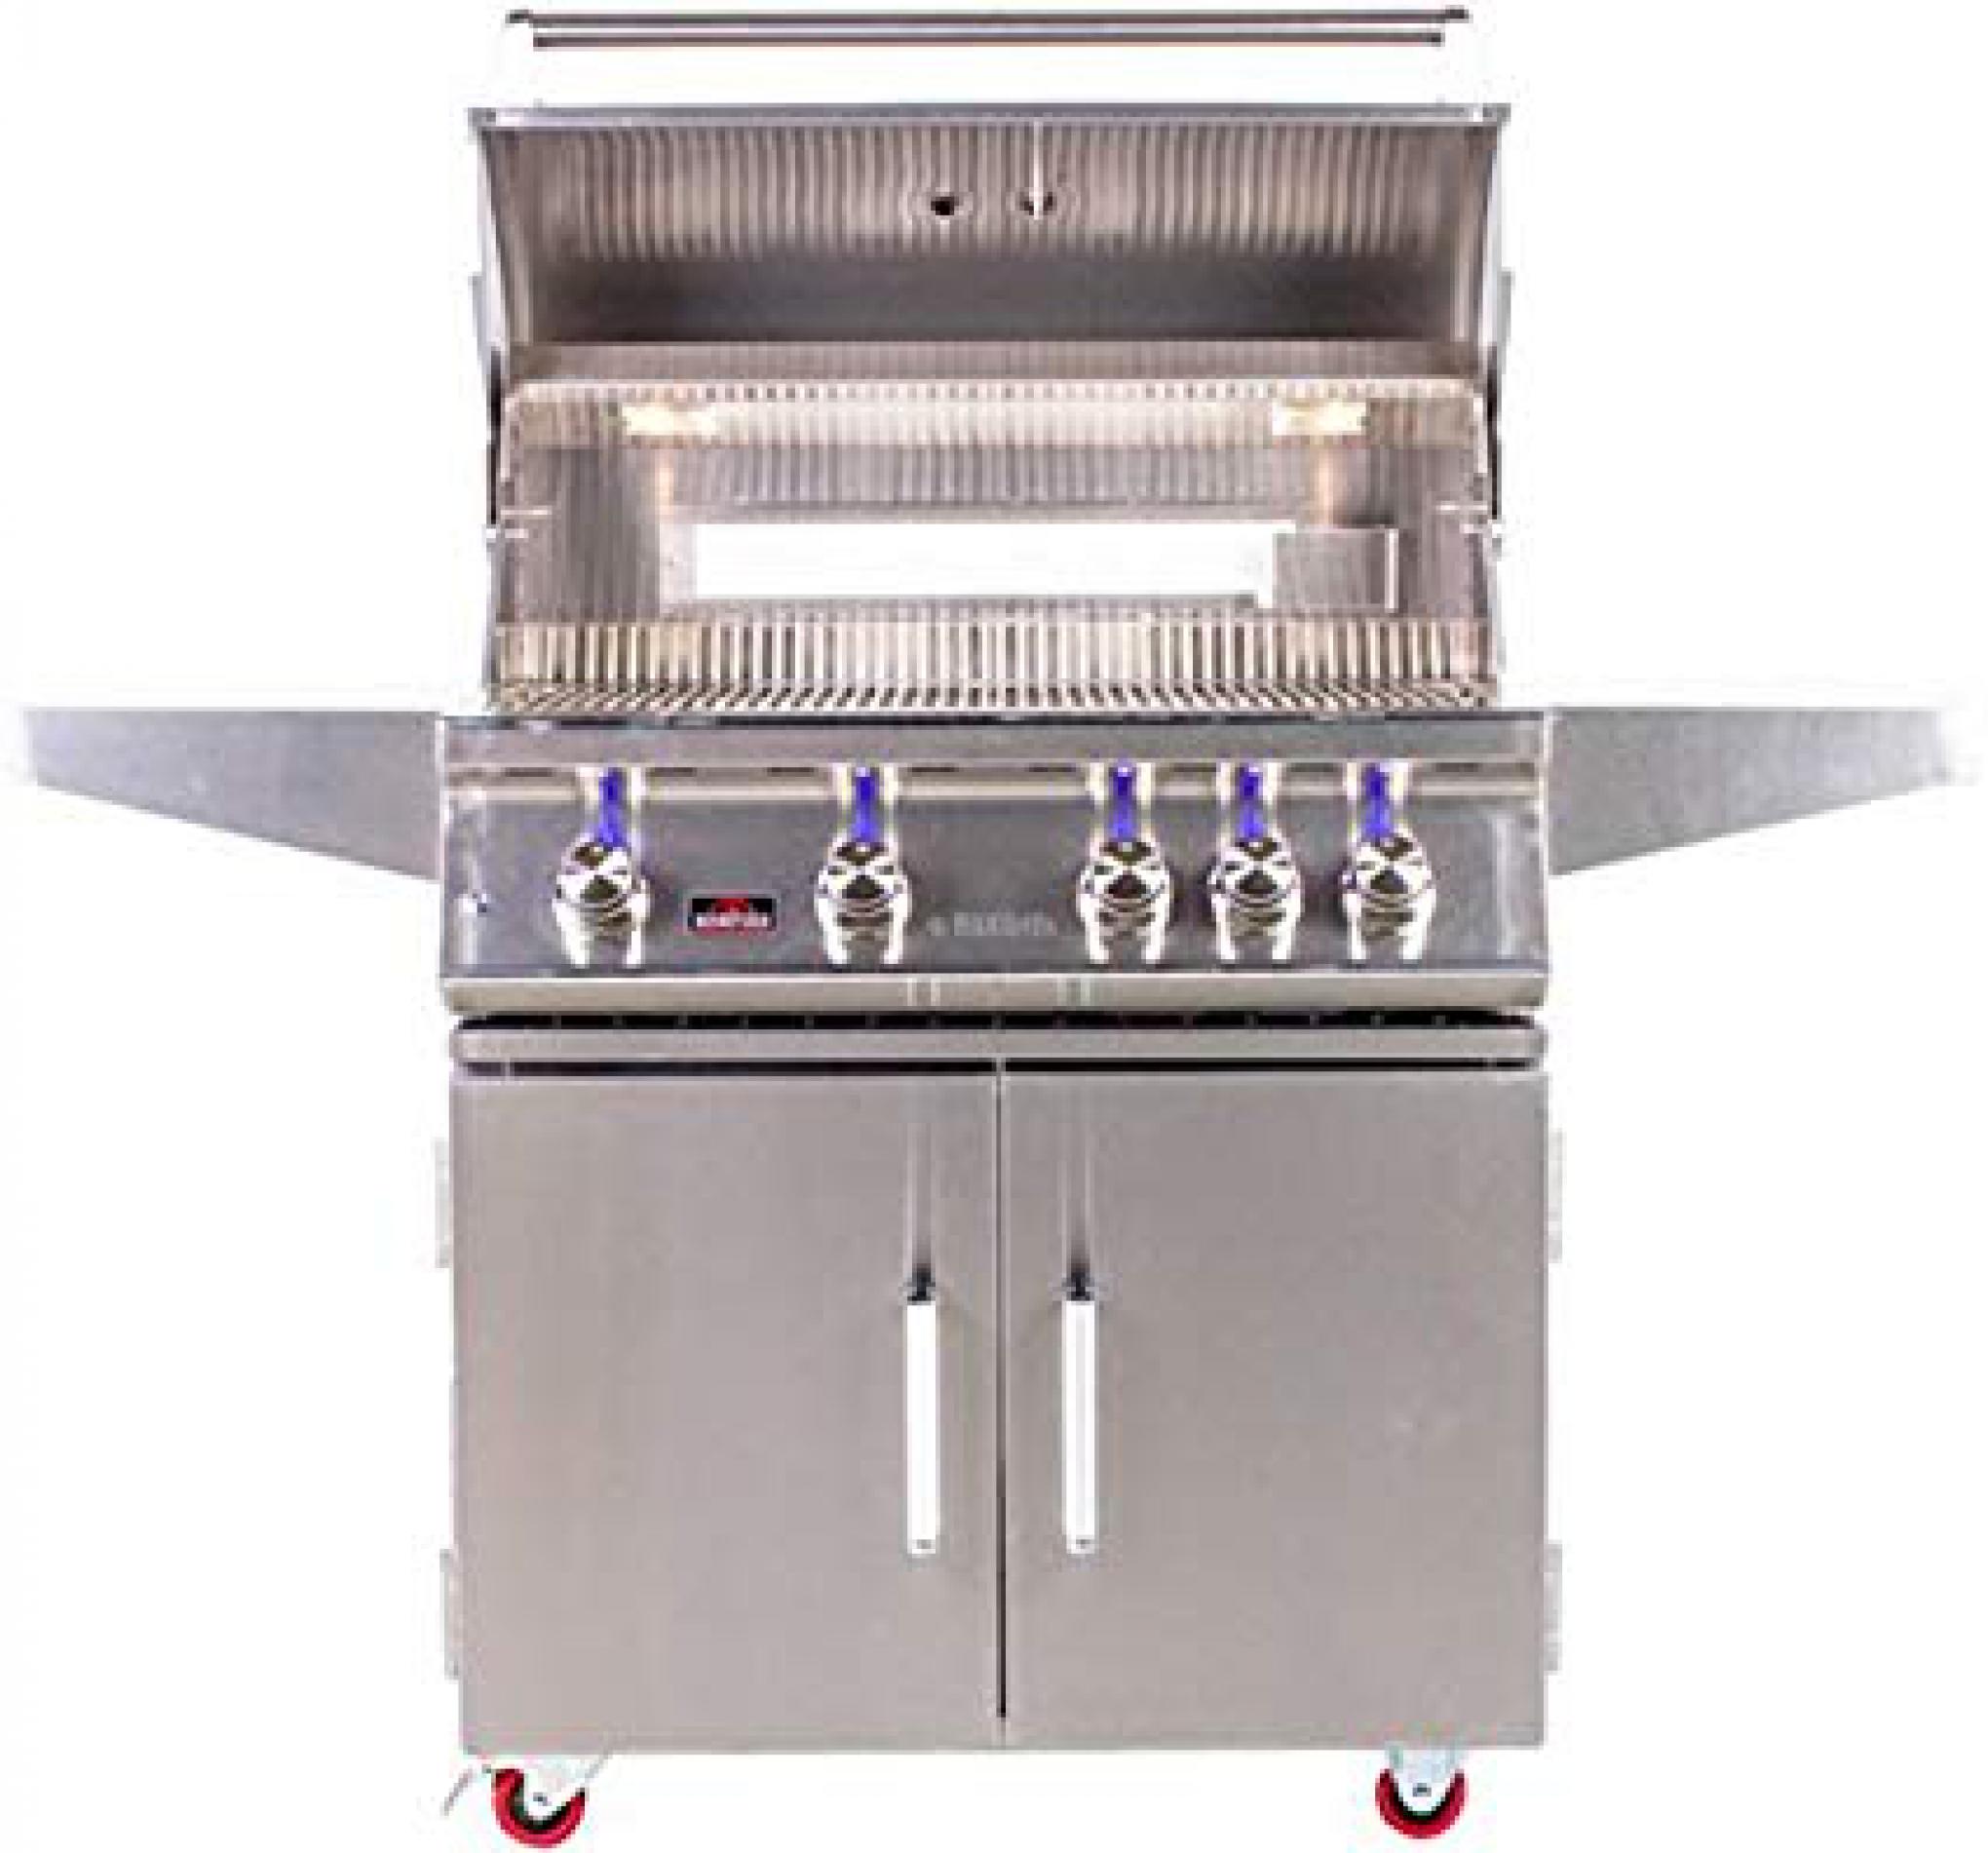 Bonfire 34" Premium Natural Gas Grill on a Cart, Stainless Steel